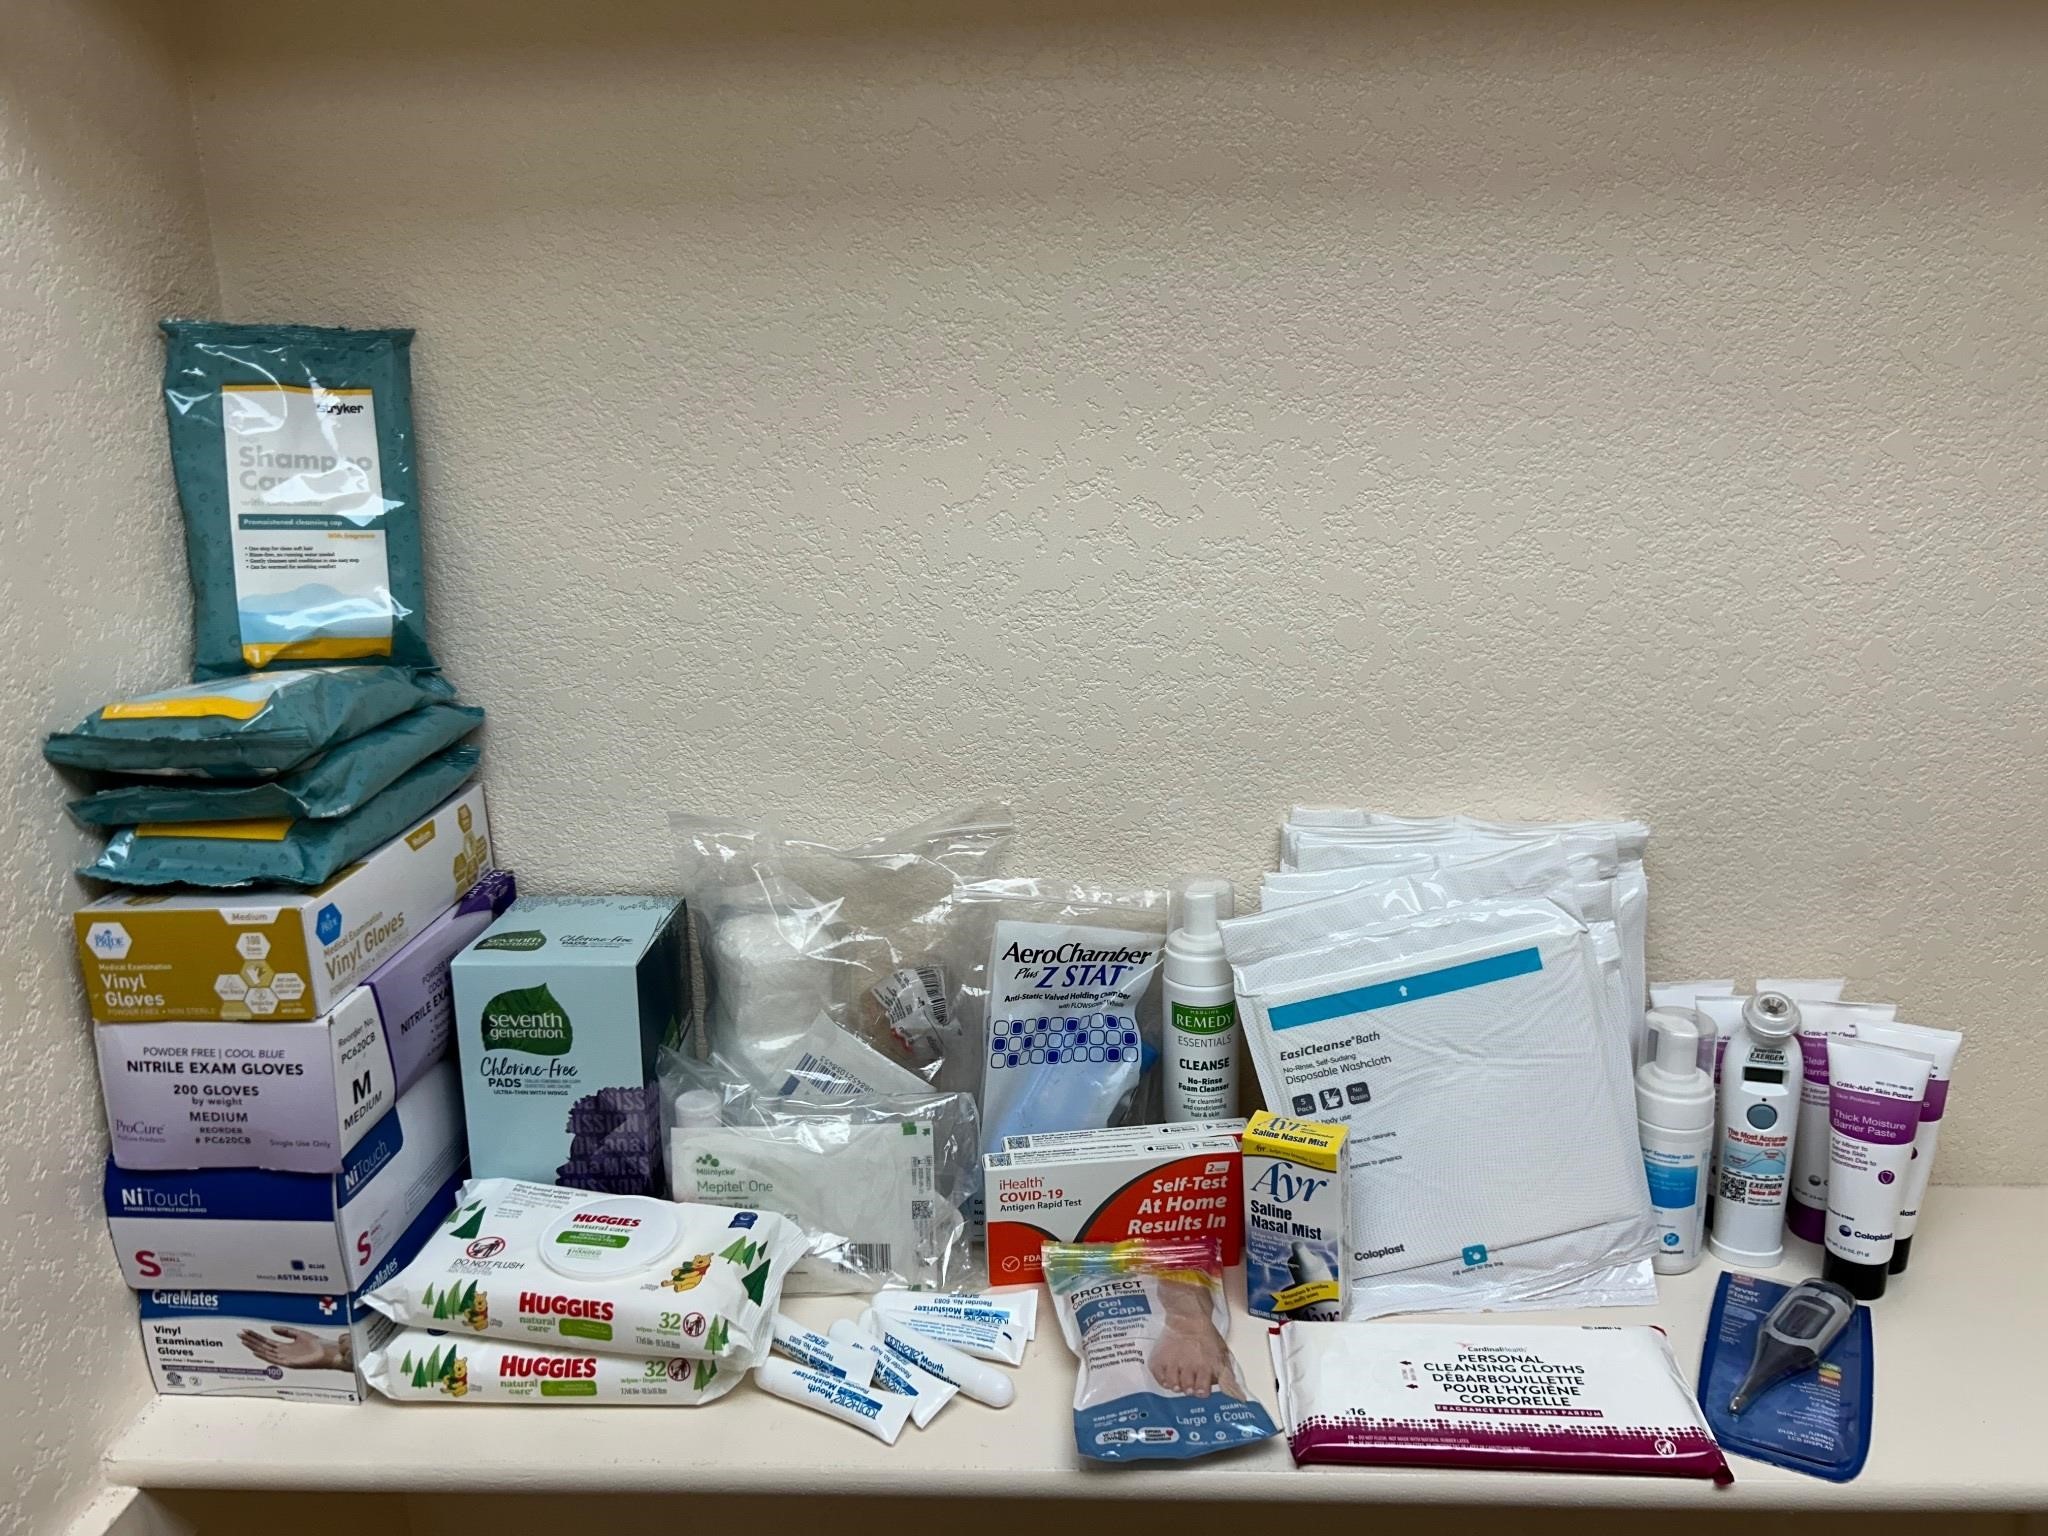 Covid Tests, Baby Wipes, Shower Caps, Thermometer